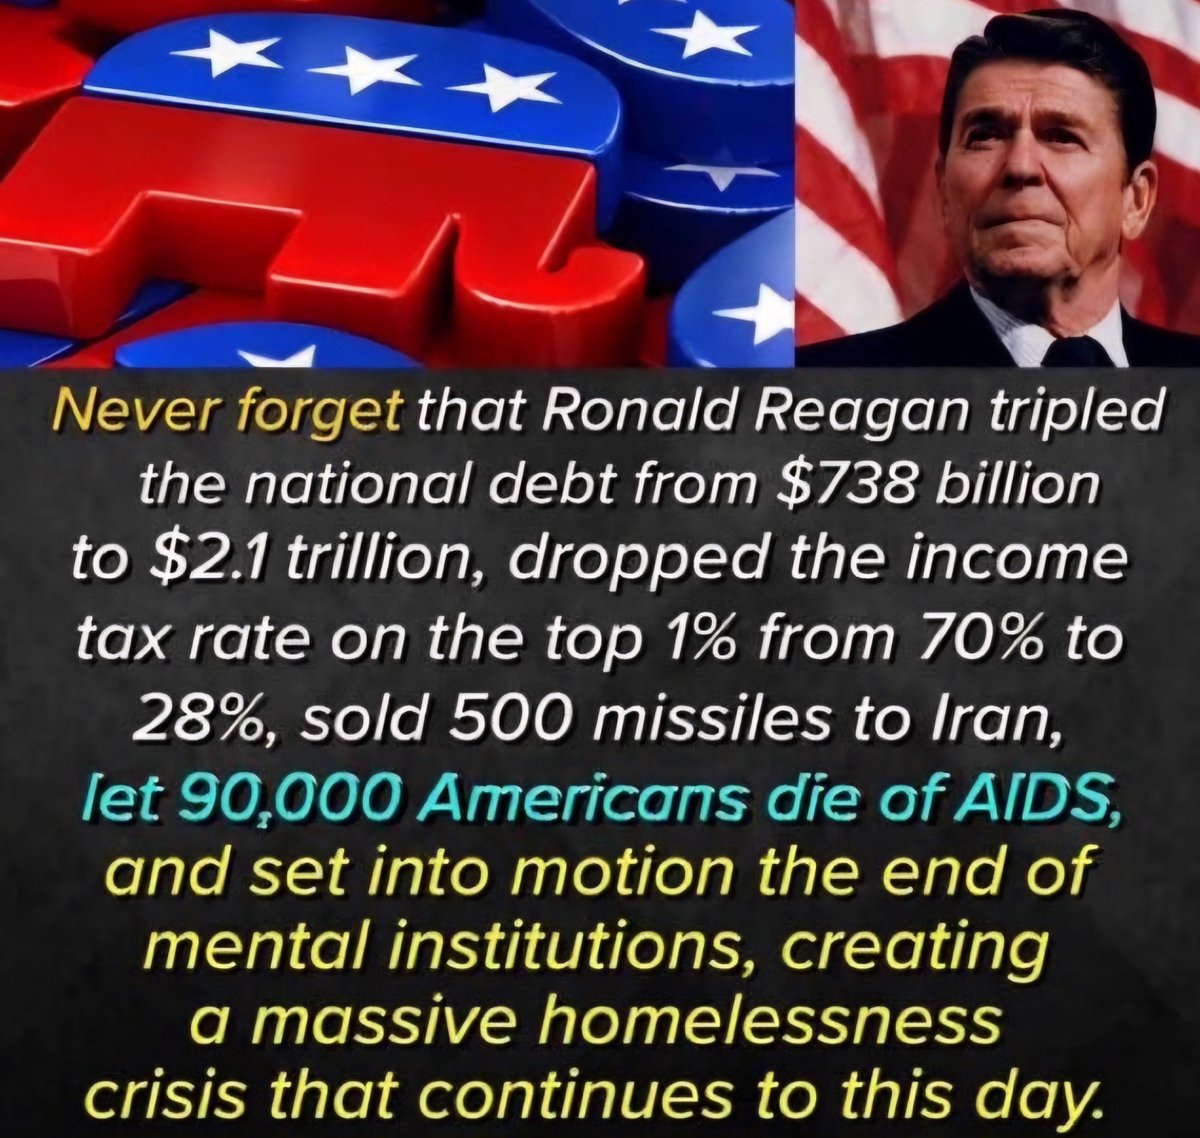 Reagan's legacy: widened wealth gap, mishandled crisis like Iran-Contra and AIDS, fueled homelessness, and left a staggering national debt. #HistoryMatters #Reaganomics